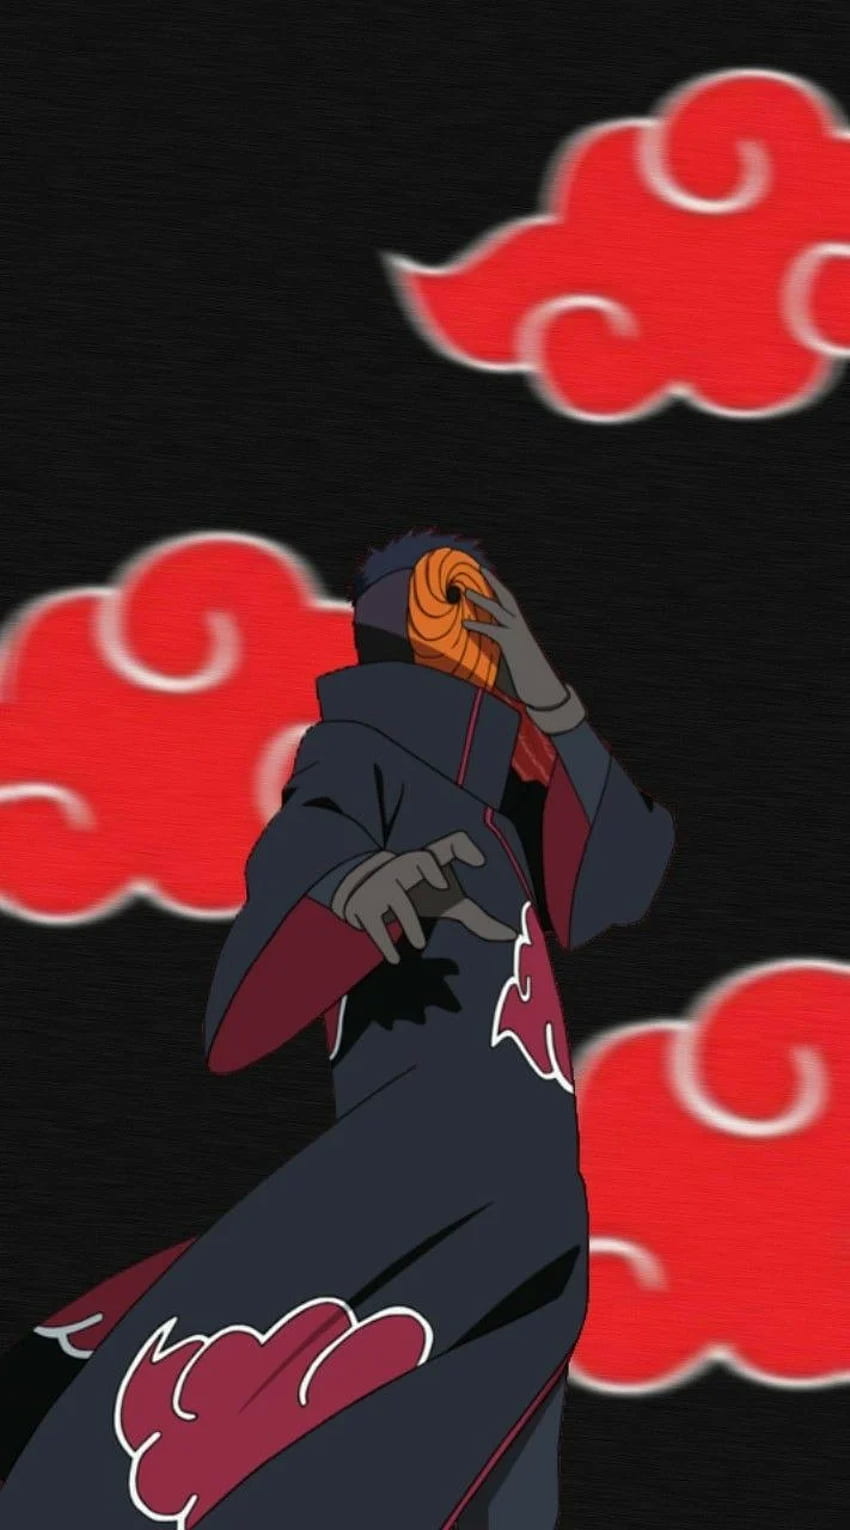 Top 25 Best Obito Uchiha iPhone Wallpapers [ 4k & HD Quality ]